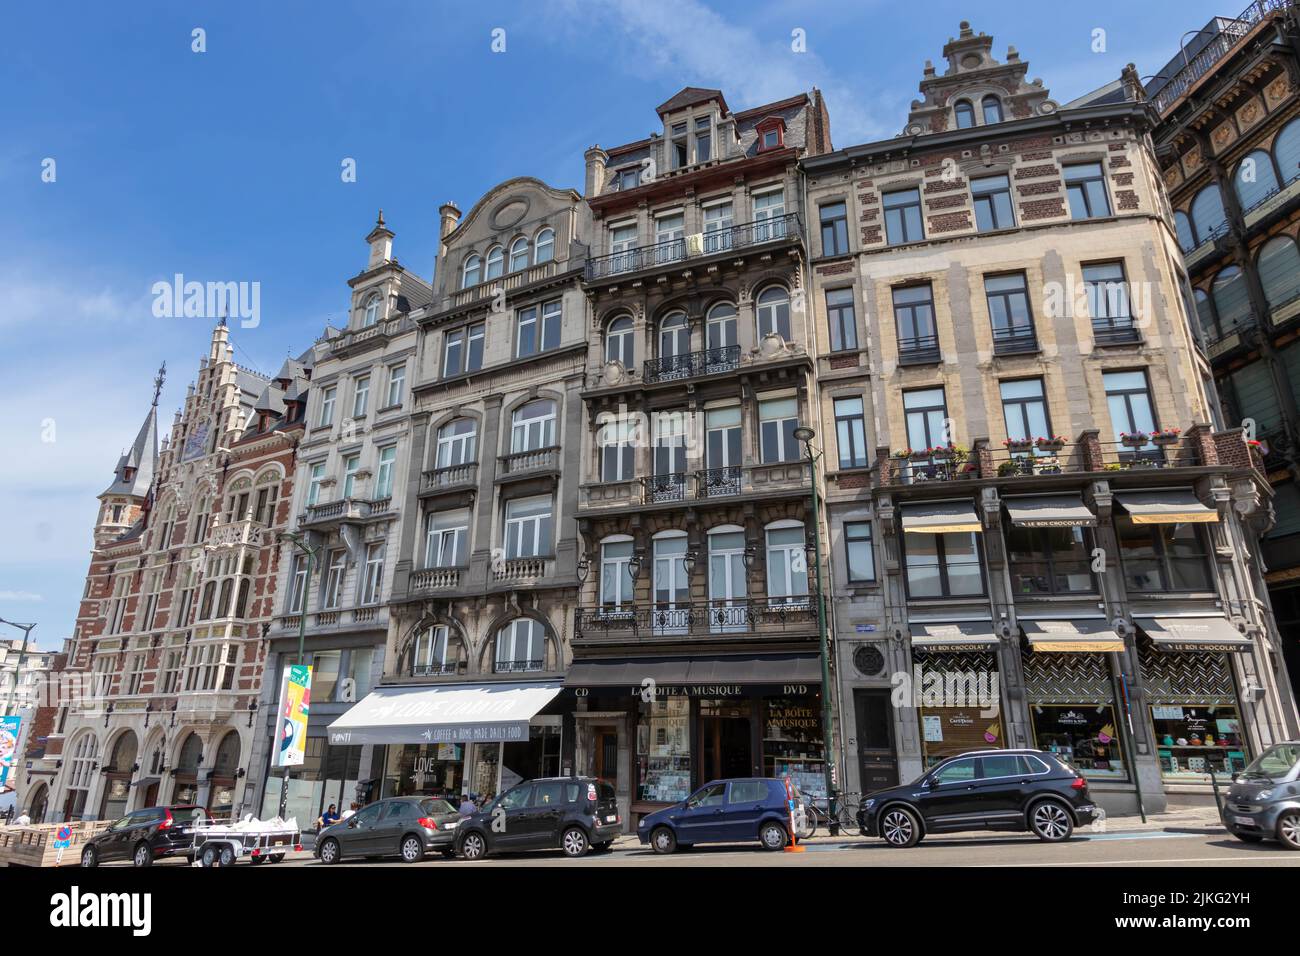 Brussels, Belgium - July 17, 2018: Coudenberg Street at the intersection with rue du Musee Stock Photo